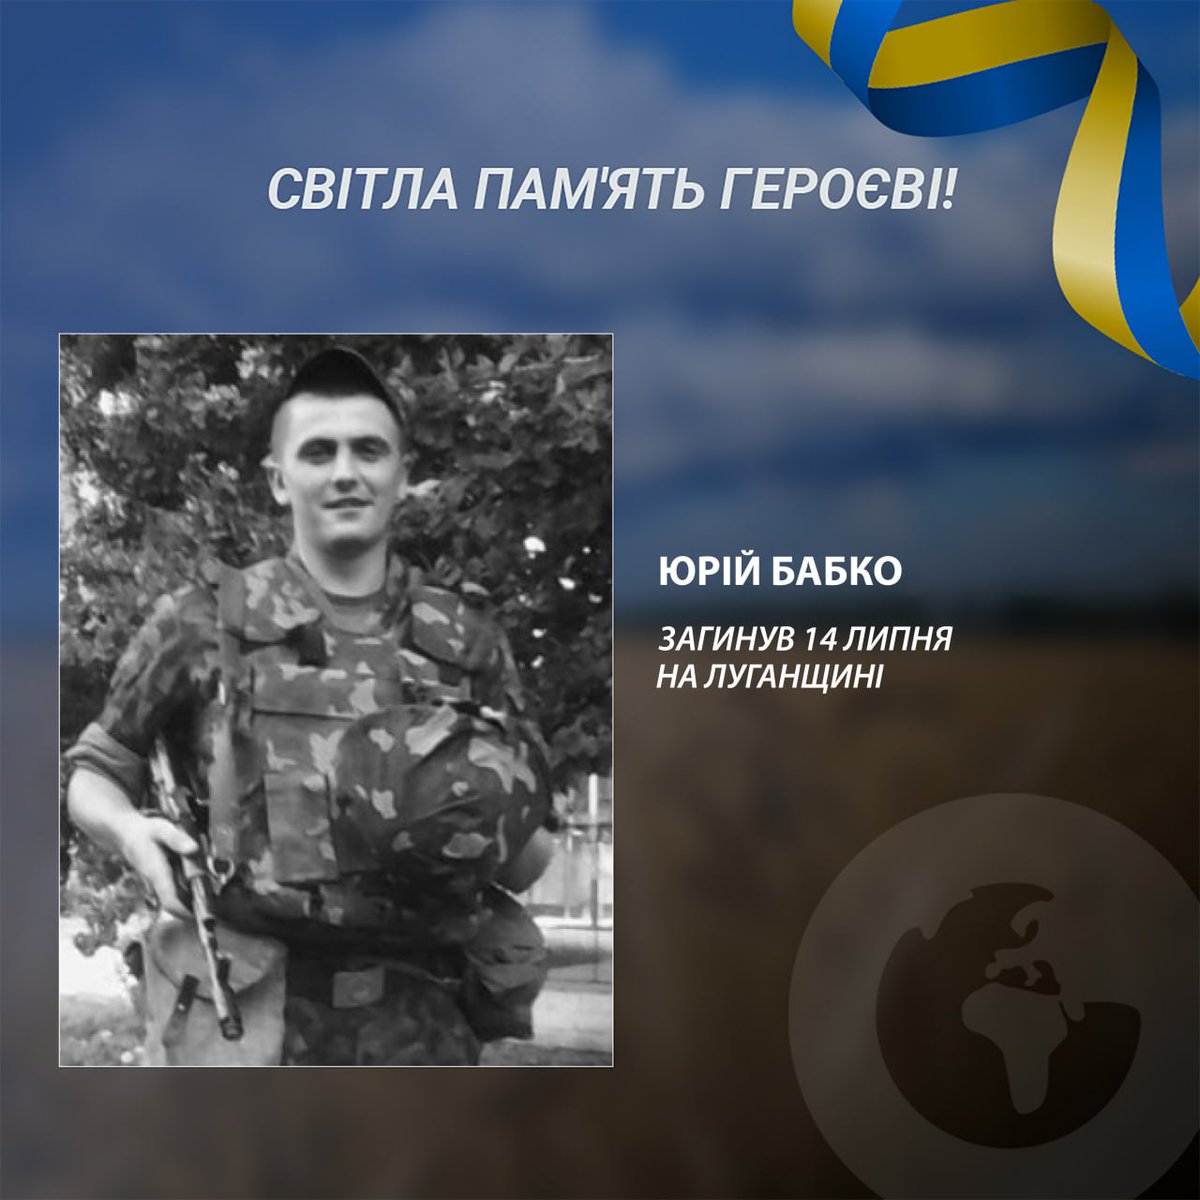 New day. And again at 9 in the morning. A time when we remember our fallen warriors. Those thanks to whom our state is still holding on and will continue to hold on.

Today, along with others, we remember the #Ukrainian Hero Yuriy Babka.

A mechanical engineer by education…